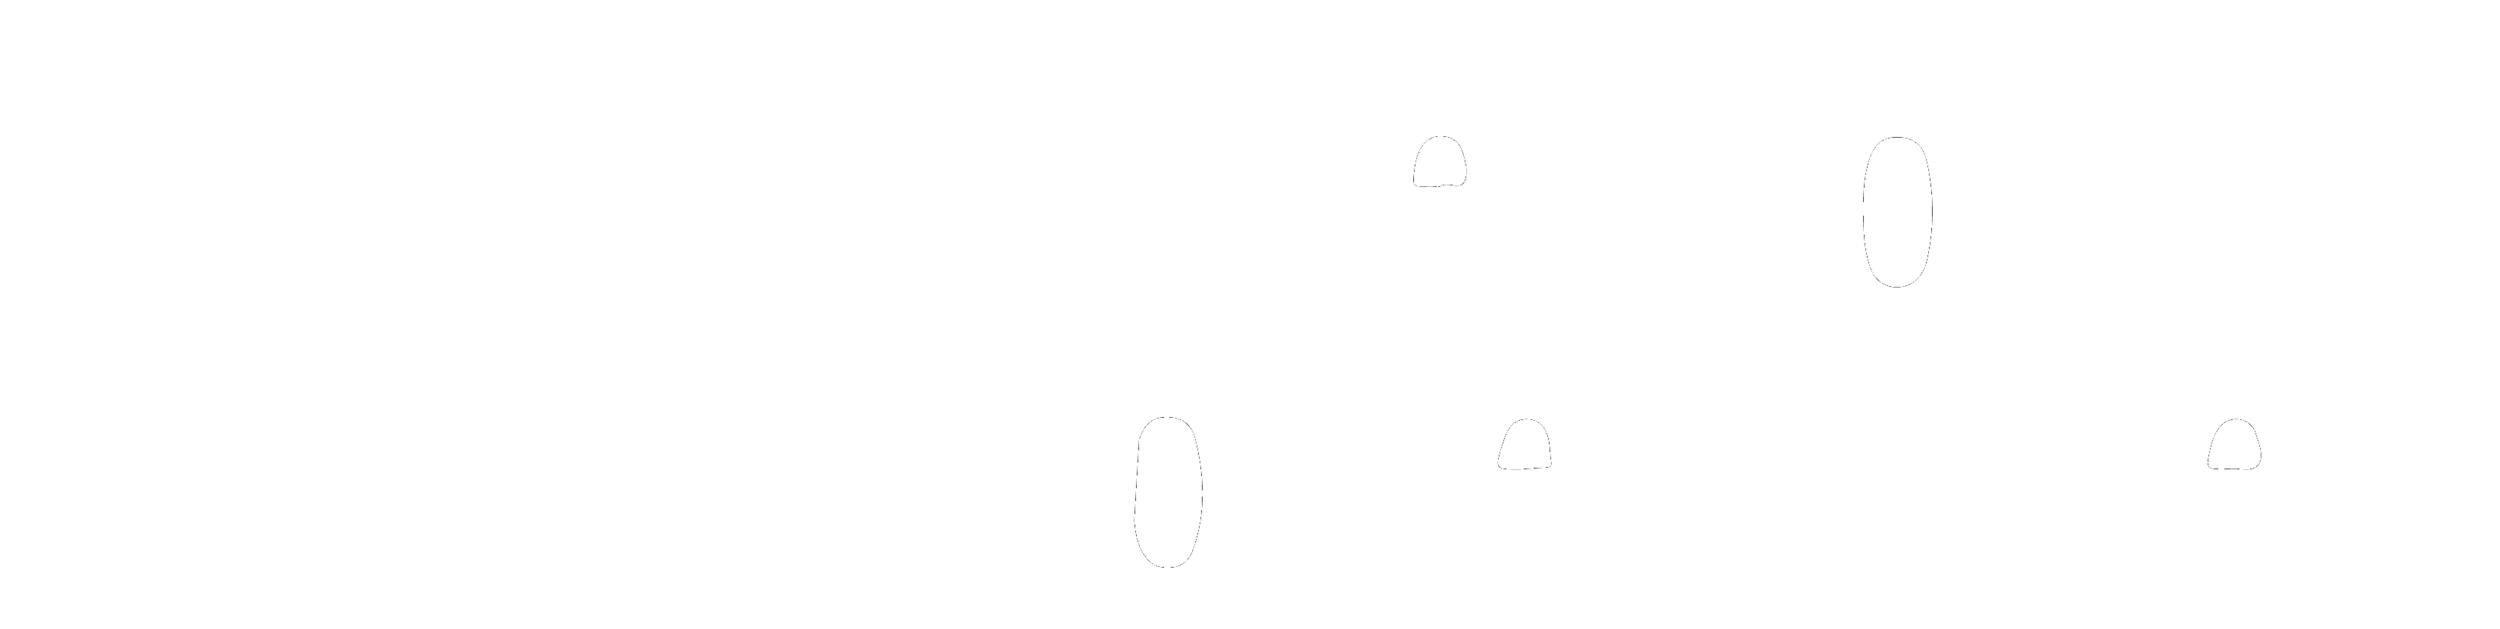 emerson-collective-logo_white.png